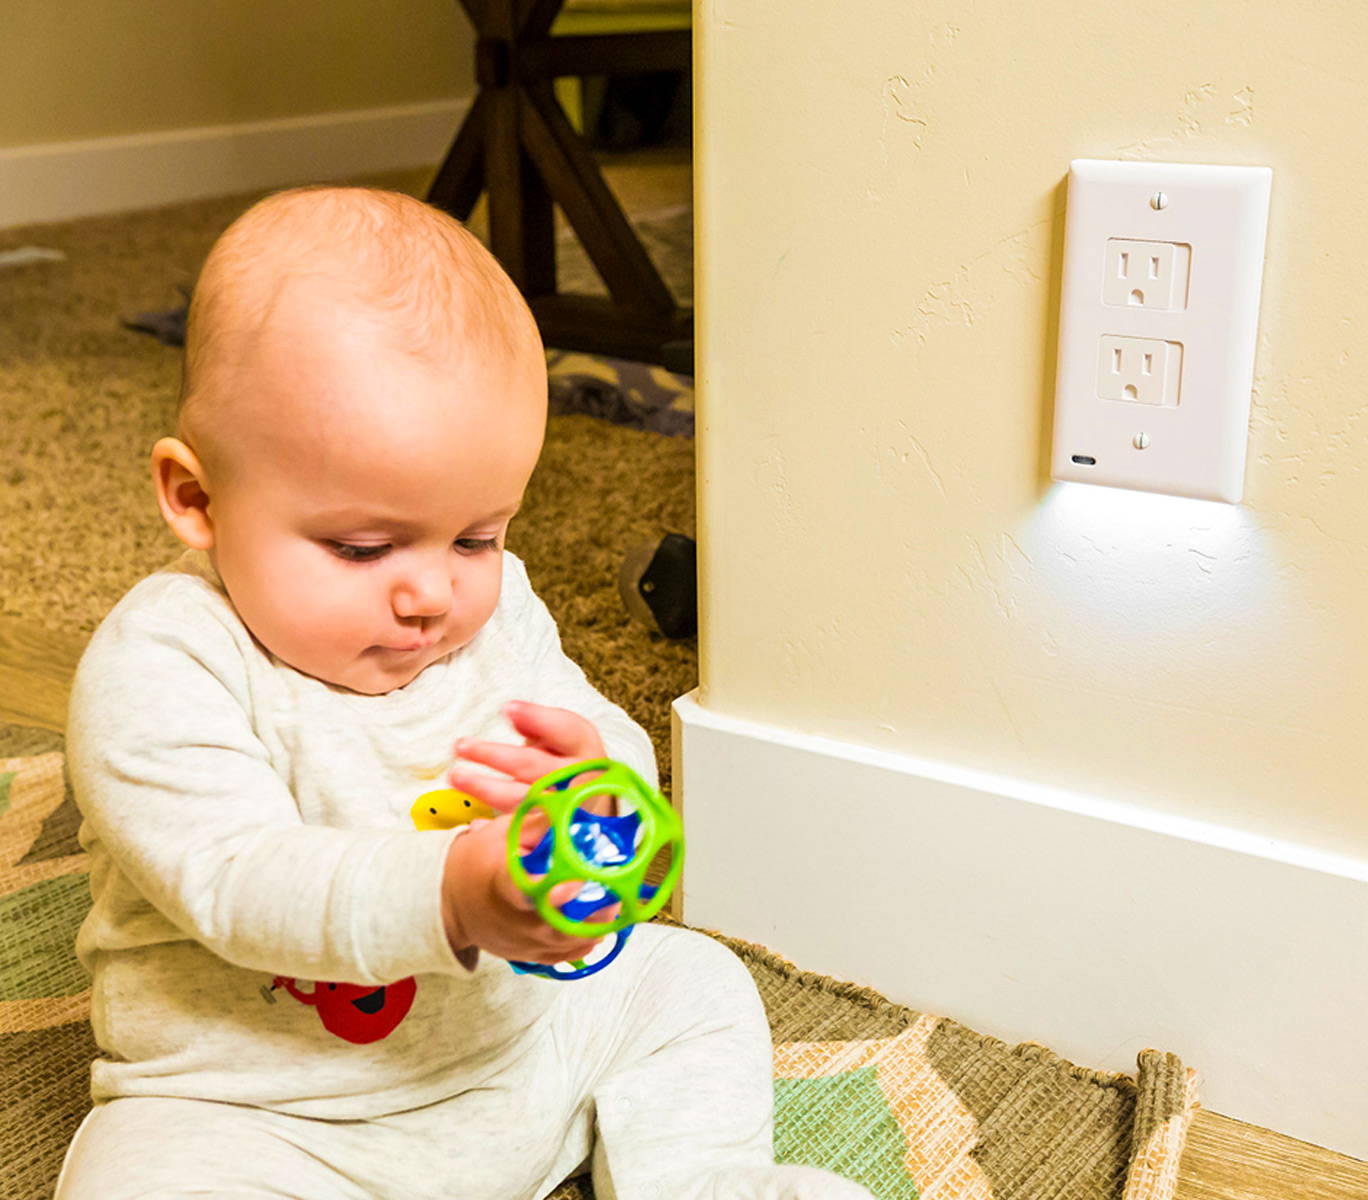 Baby playing with a toy and sitting next to the SafeLight night light for kids